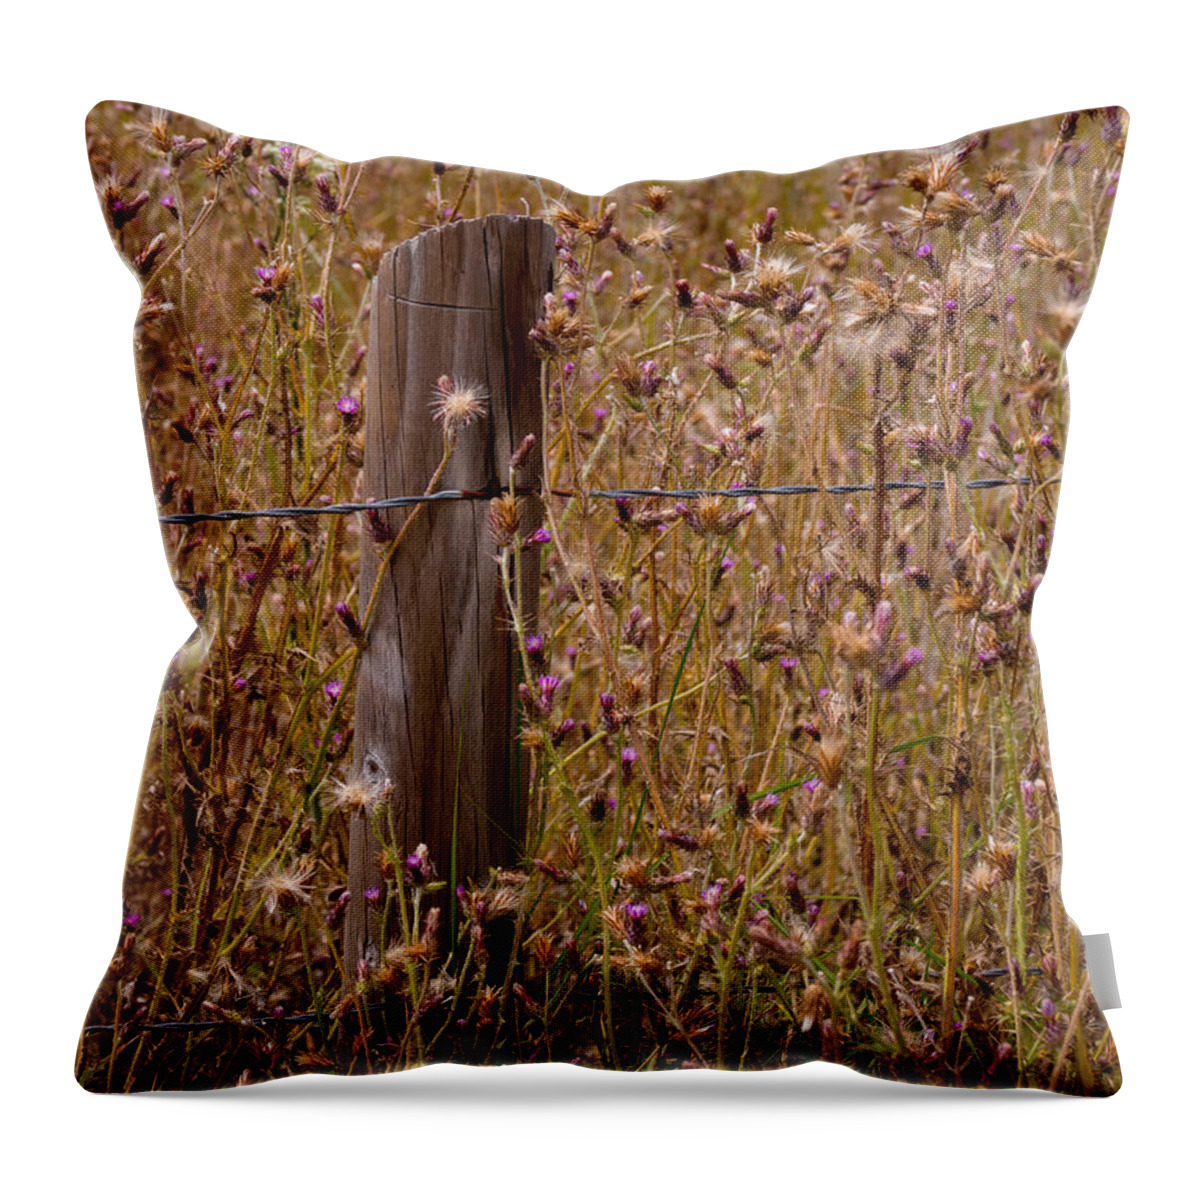 Fence Throw Pillow featuring the photograph Fenced In #1 by Derek Dean